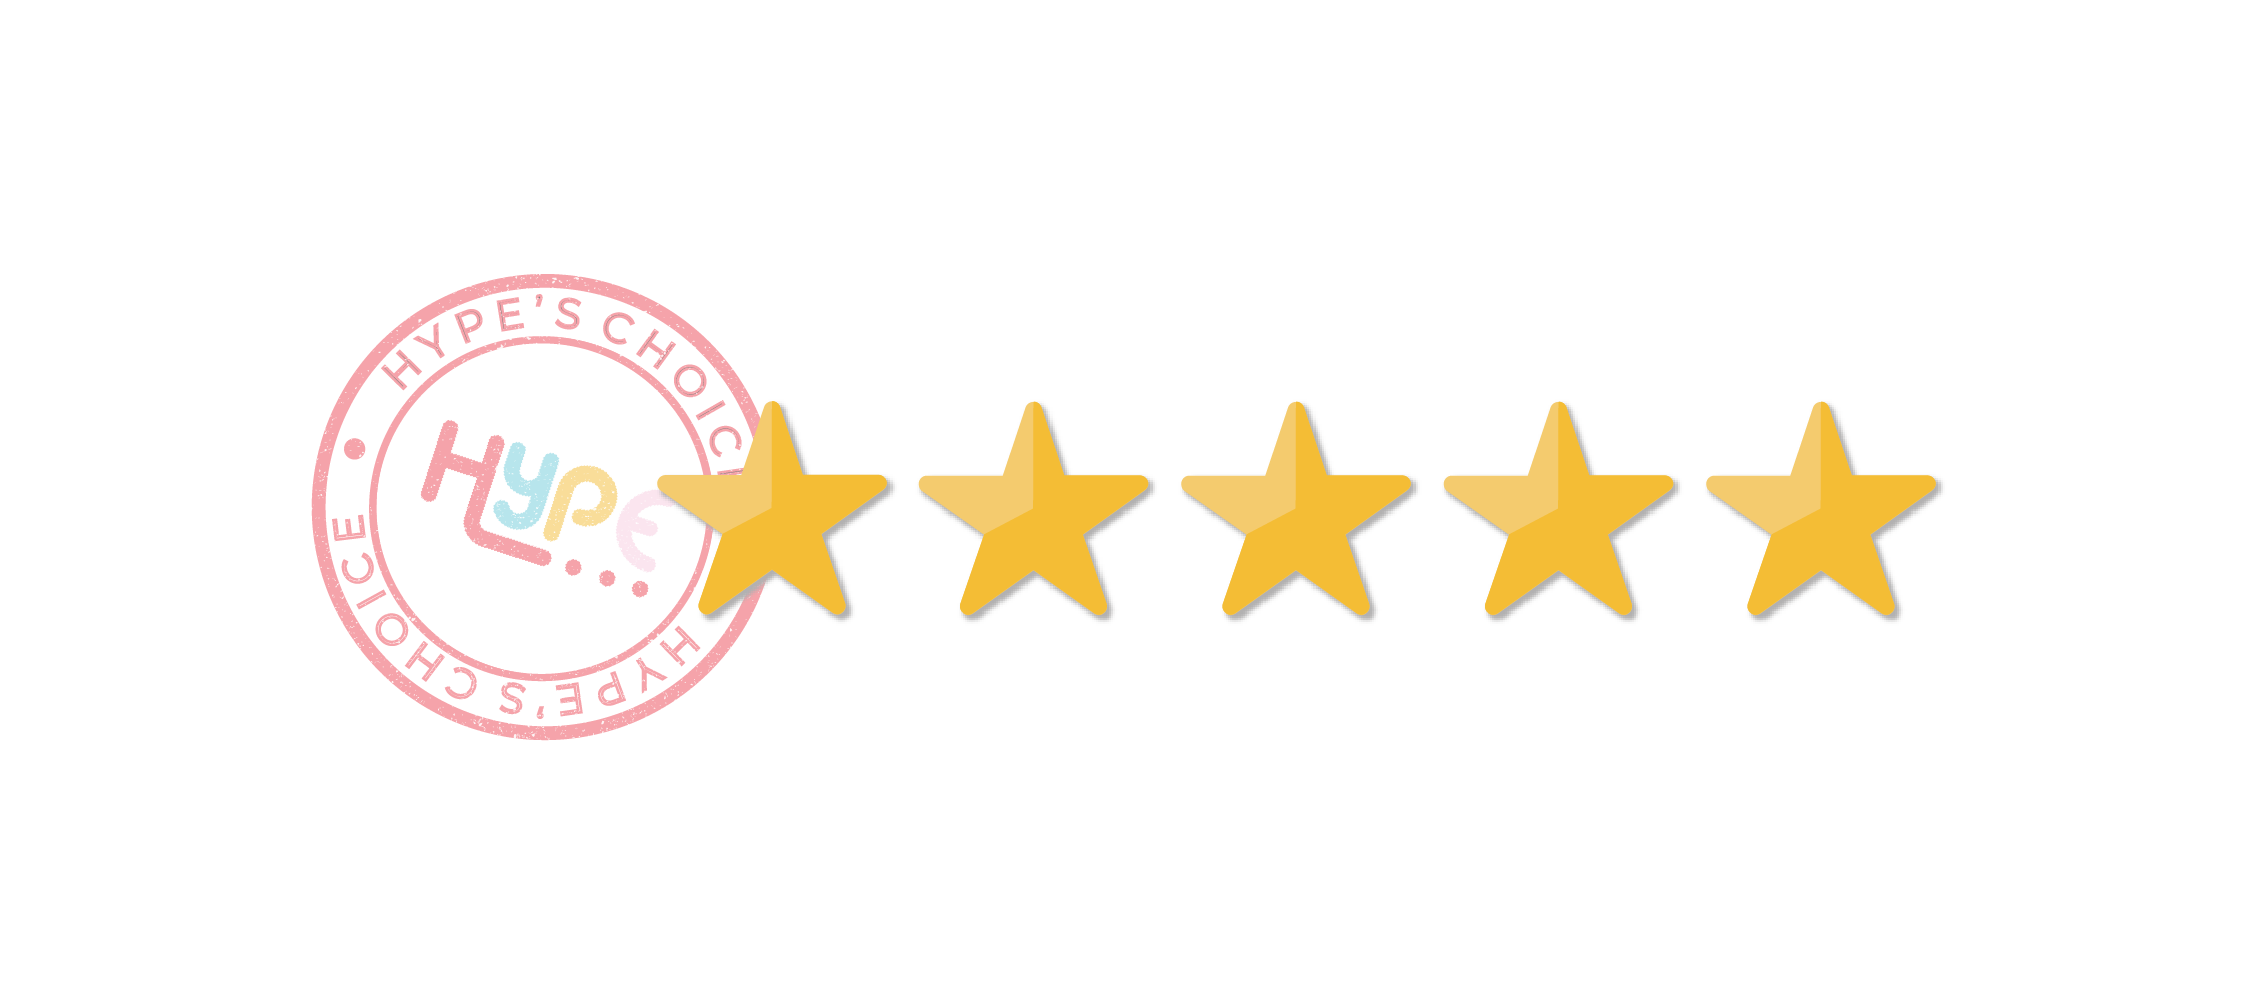 hype-review-sticker-4-stars